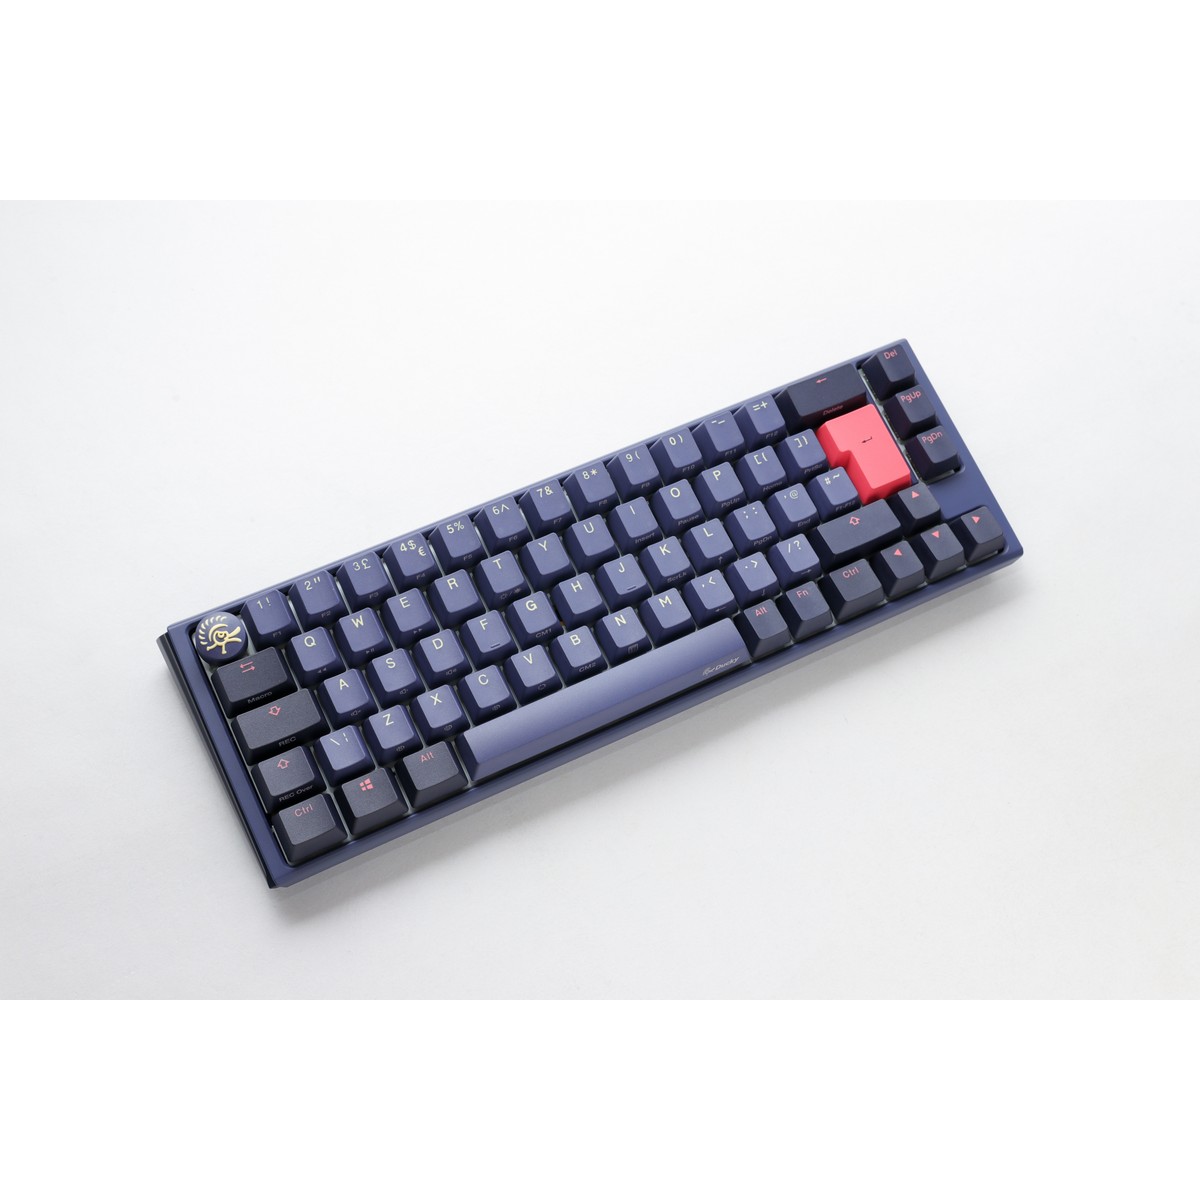 Ducky - Ducky One 3 Cosmic SF 65% USB RGB Mechanical Gaming Keyboard Cherry MX Silent Red Switch - UK Layout